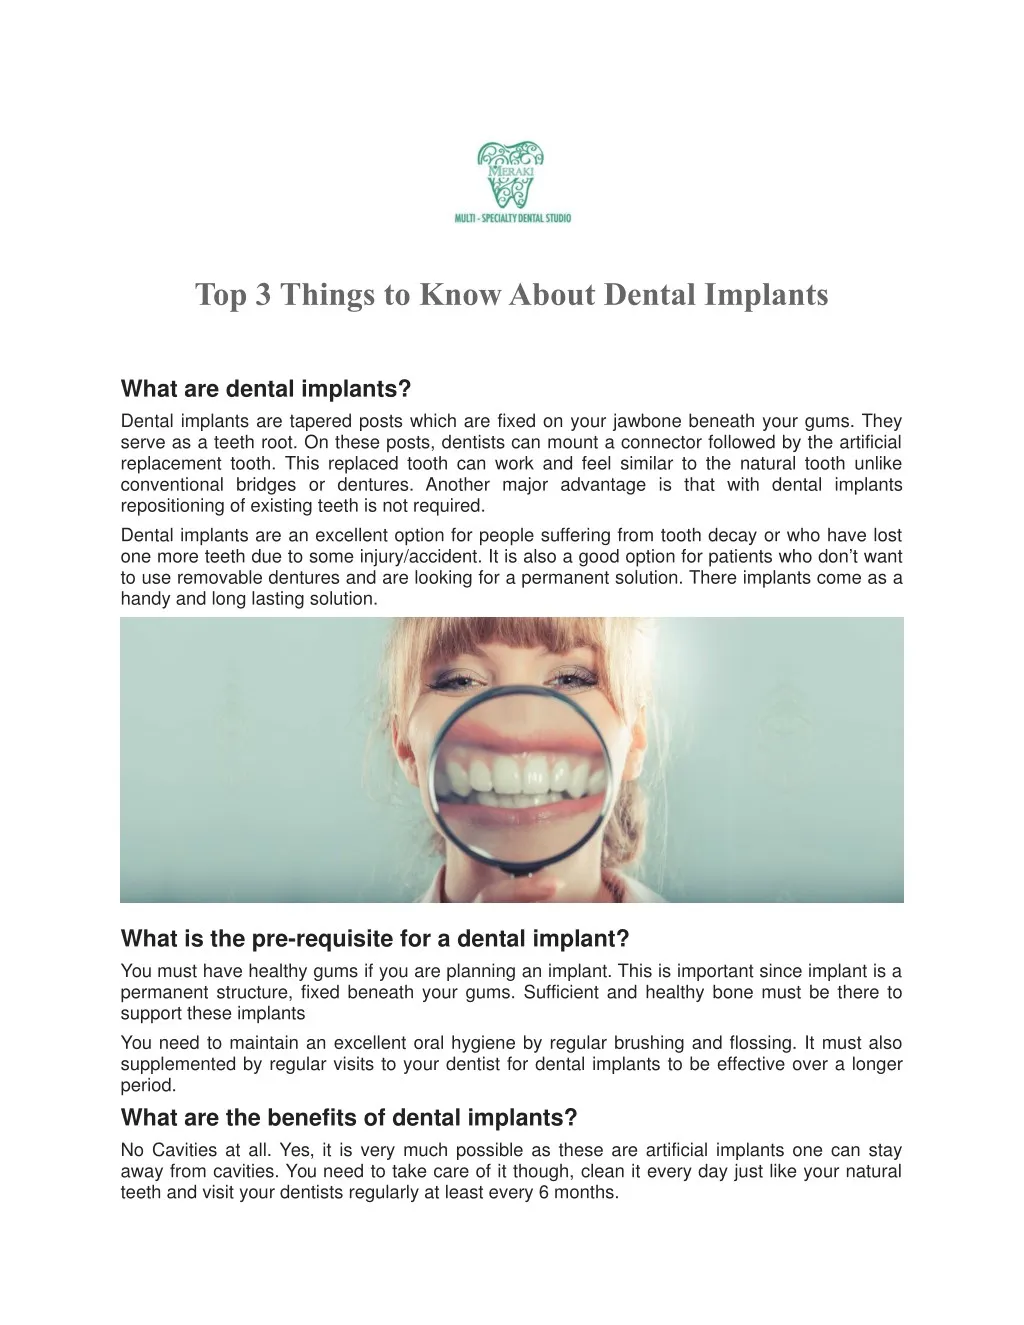 top 3 things to know about dental implants